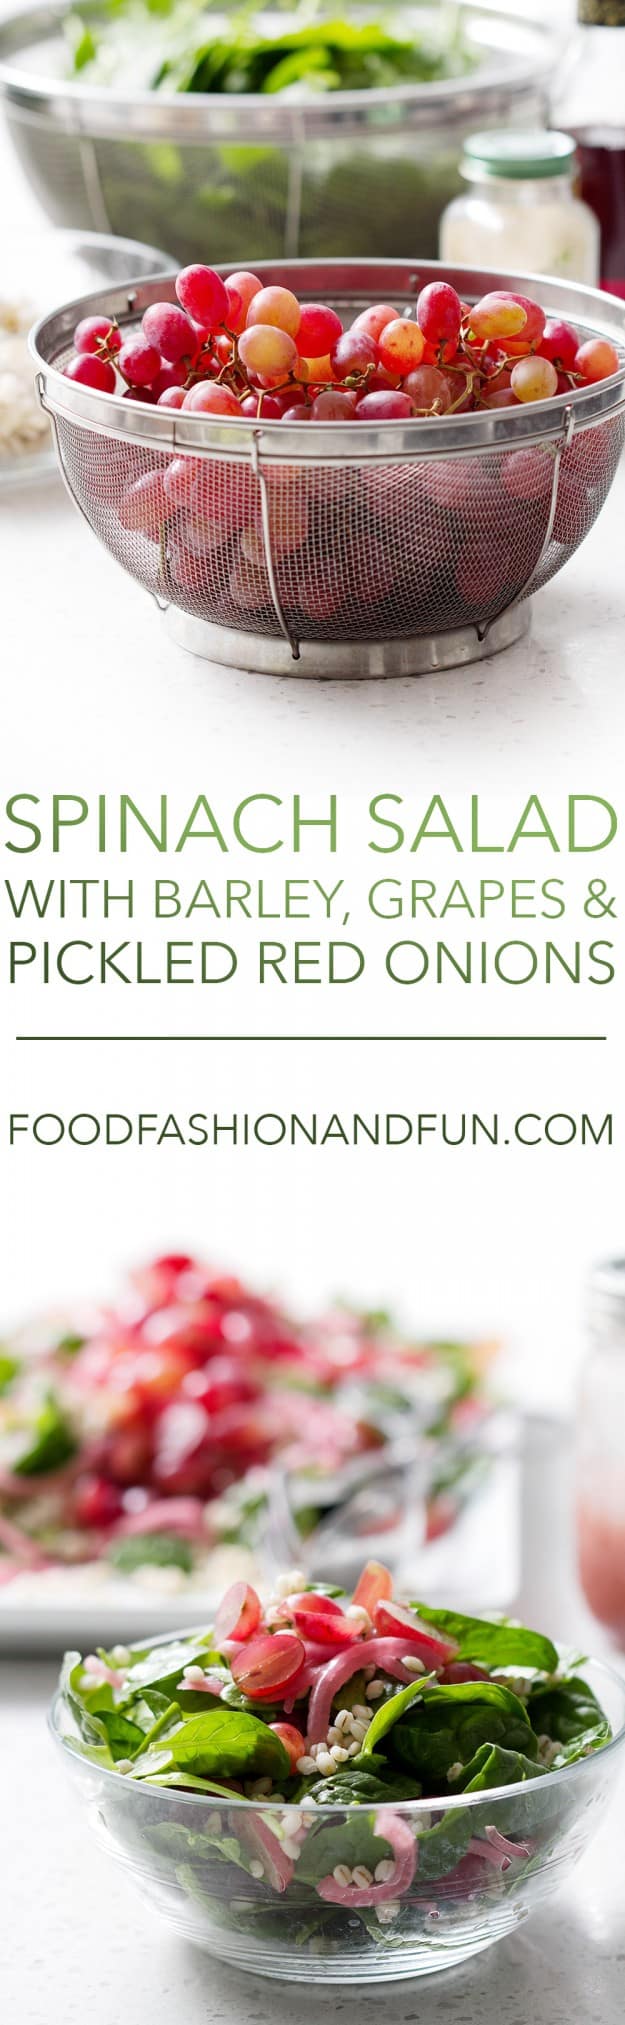 Spinach Salad with Barley, Grapes and Pickled Red Onions